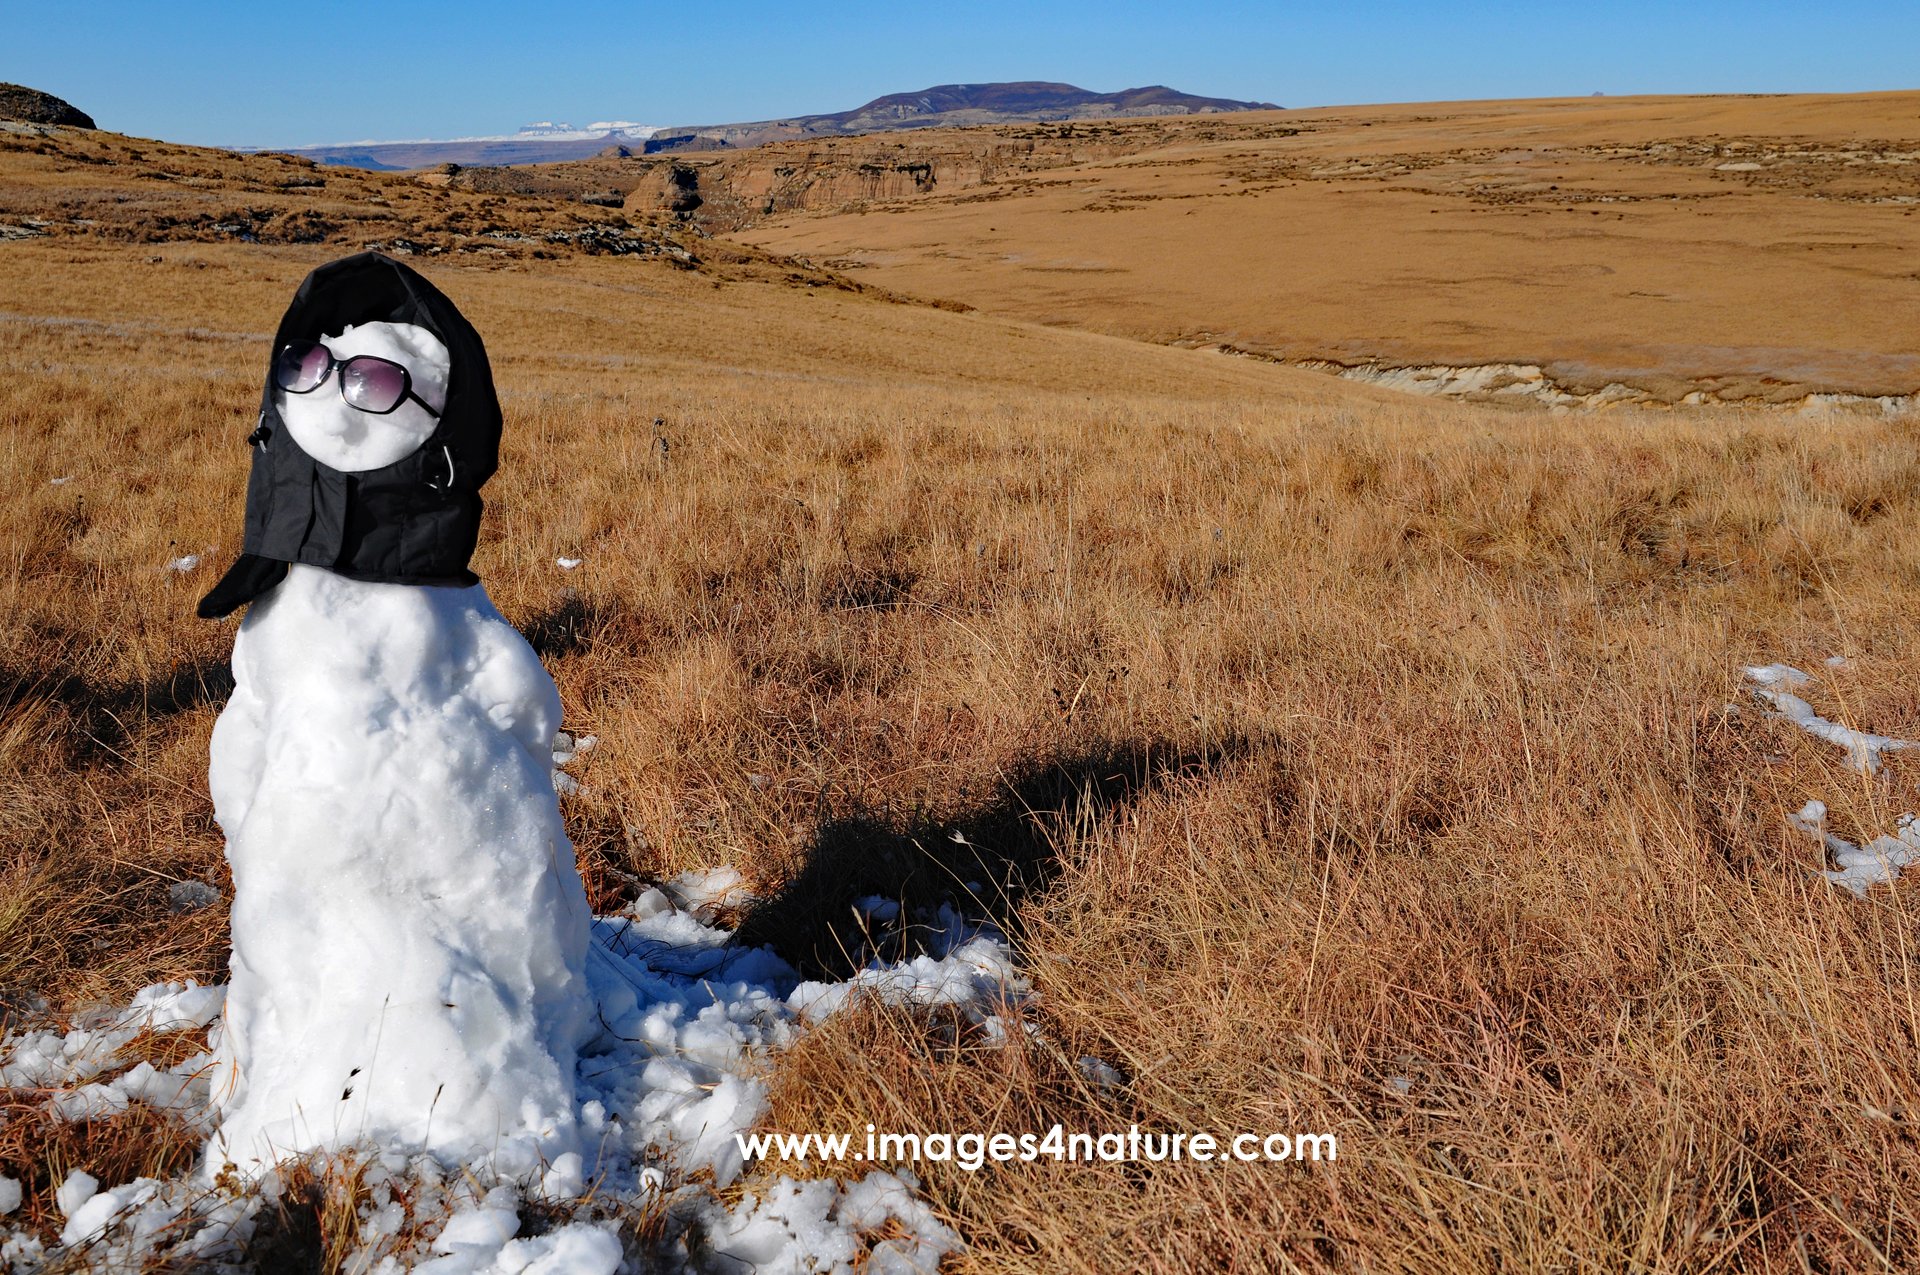 Snowman with cap and sunglasses melting on brown grasslands